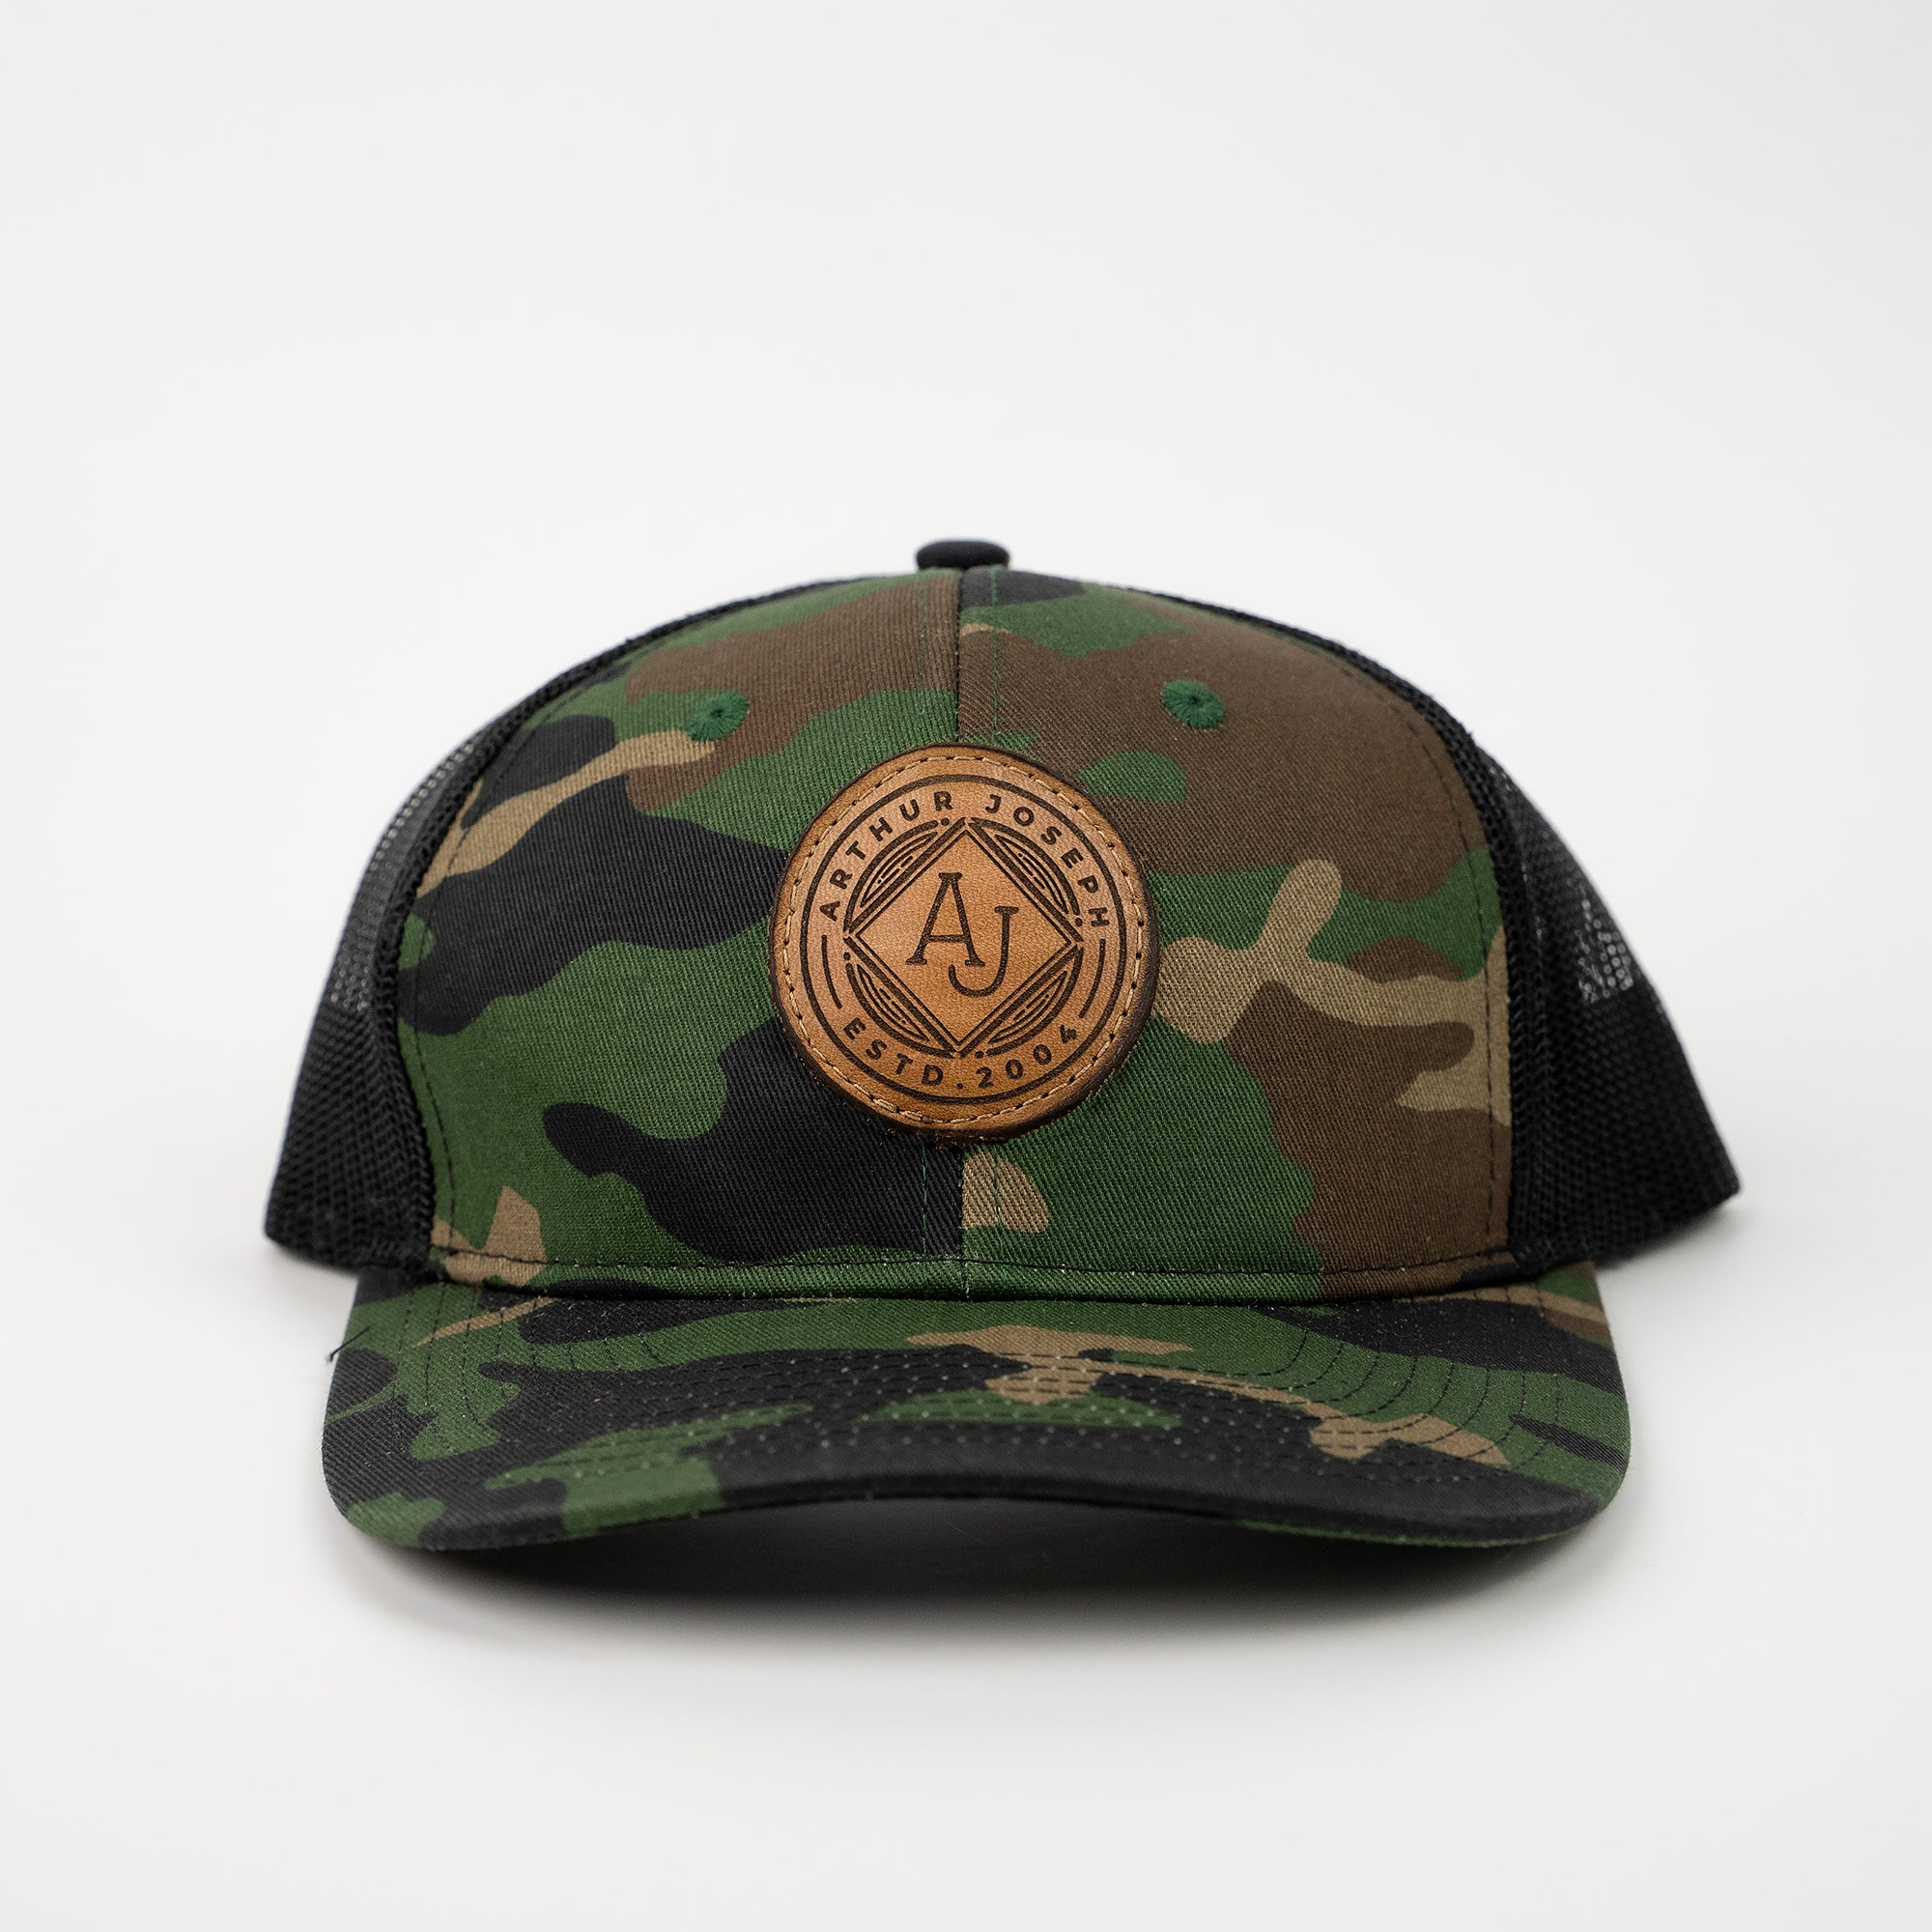 Camoflauge Port Authority C112 trucker hat with custom leather patch